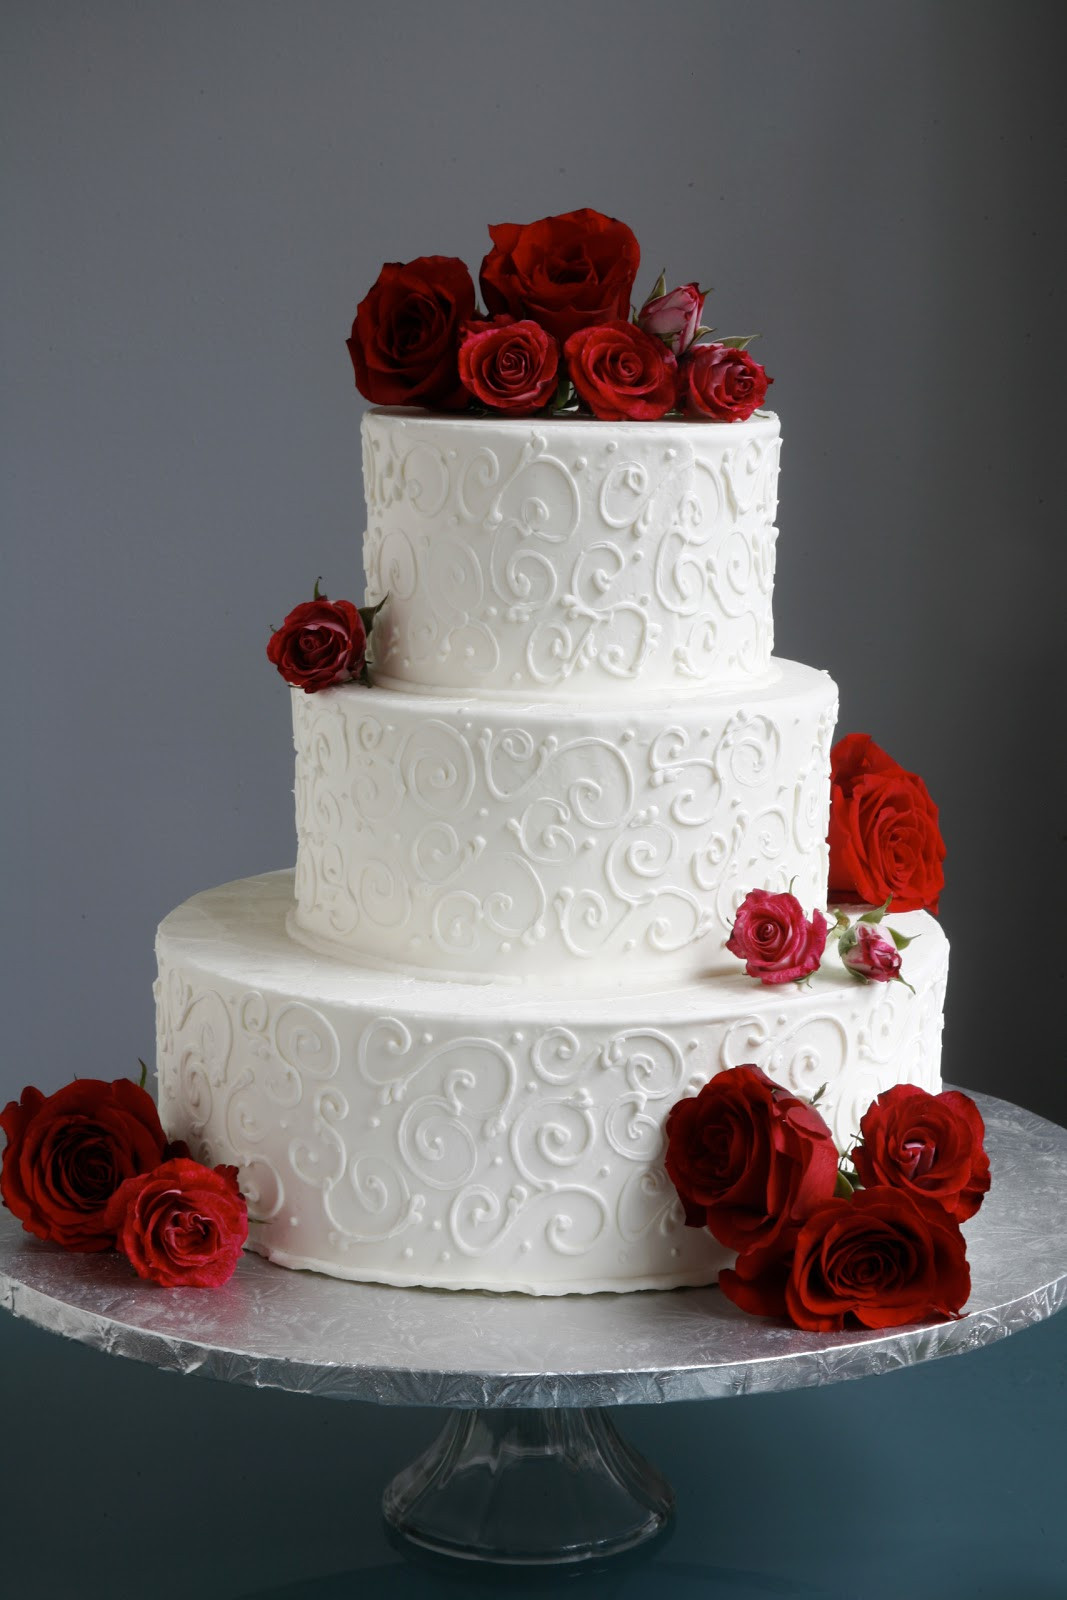 Wedding Cakes With Red Roses
 A Simple Cake Wedding Cake with Fresh Flowers From